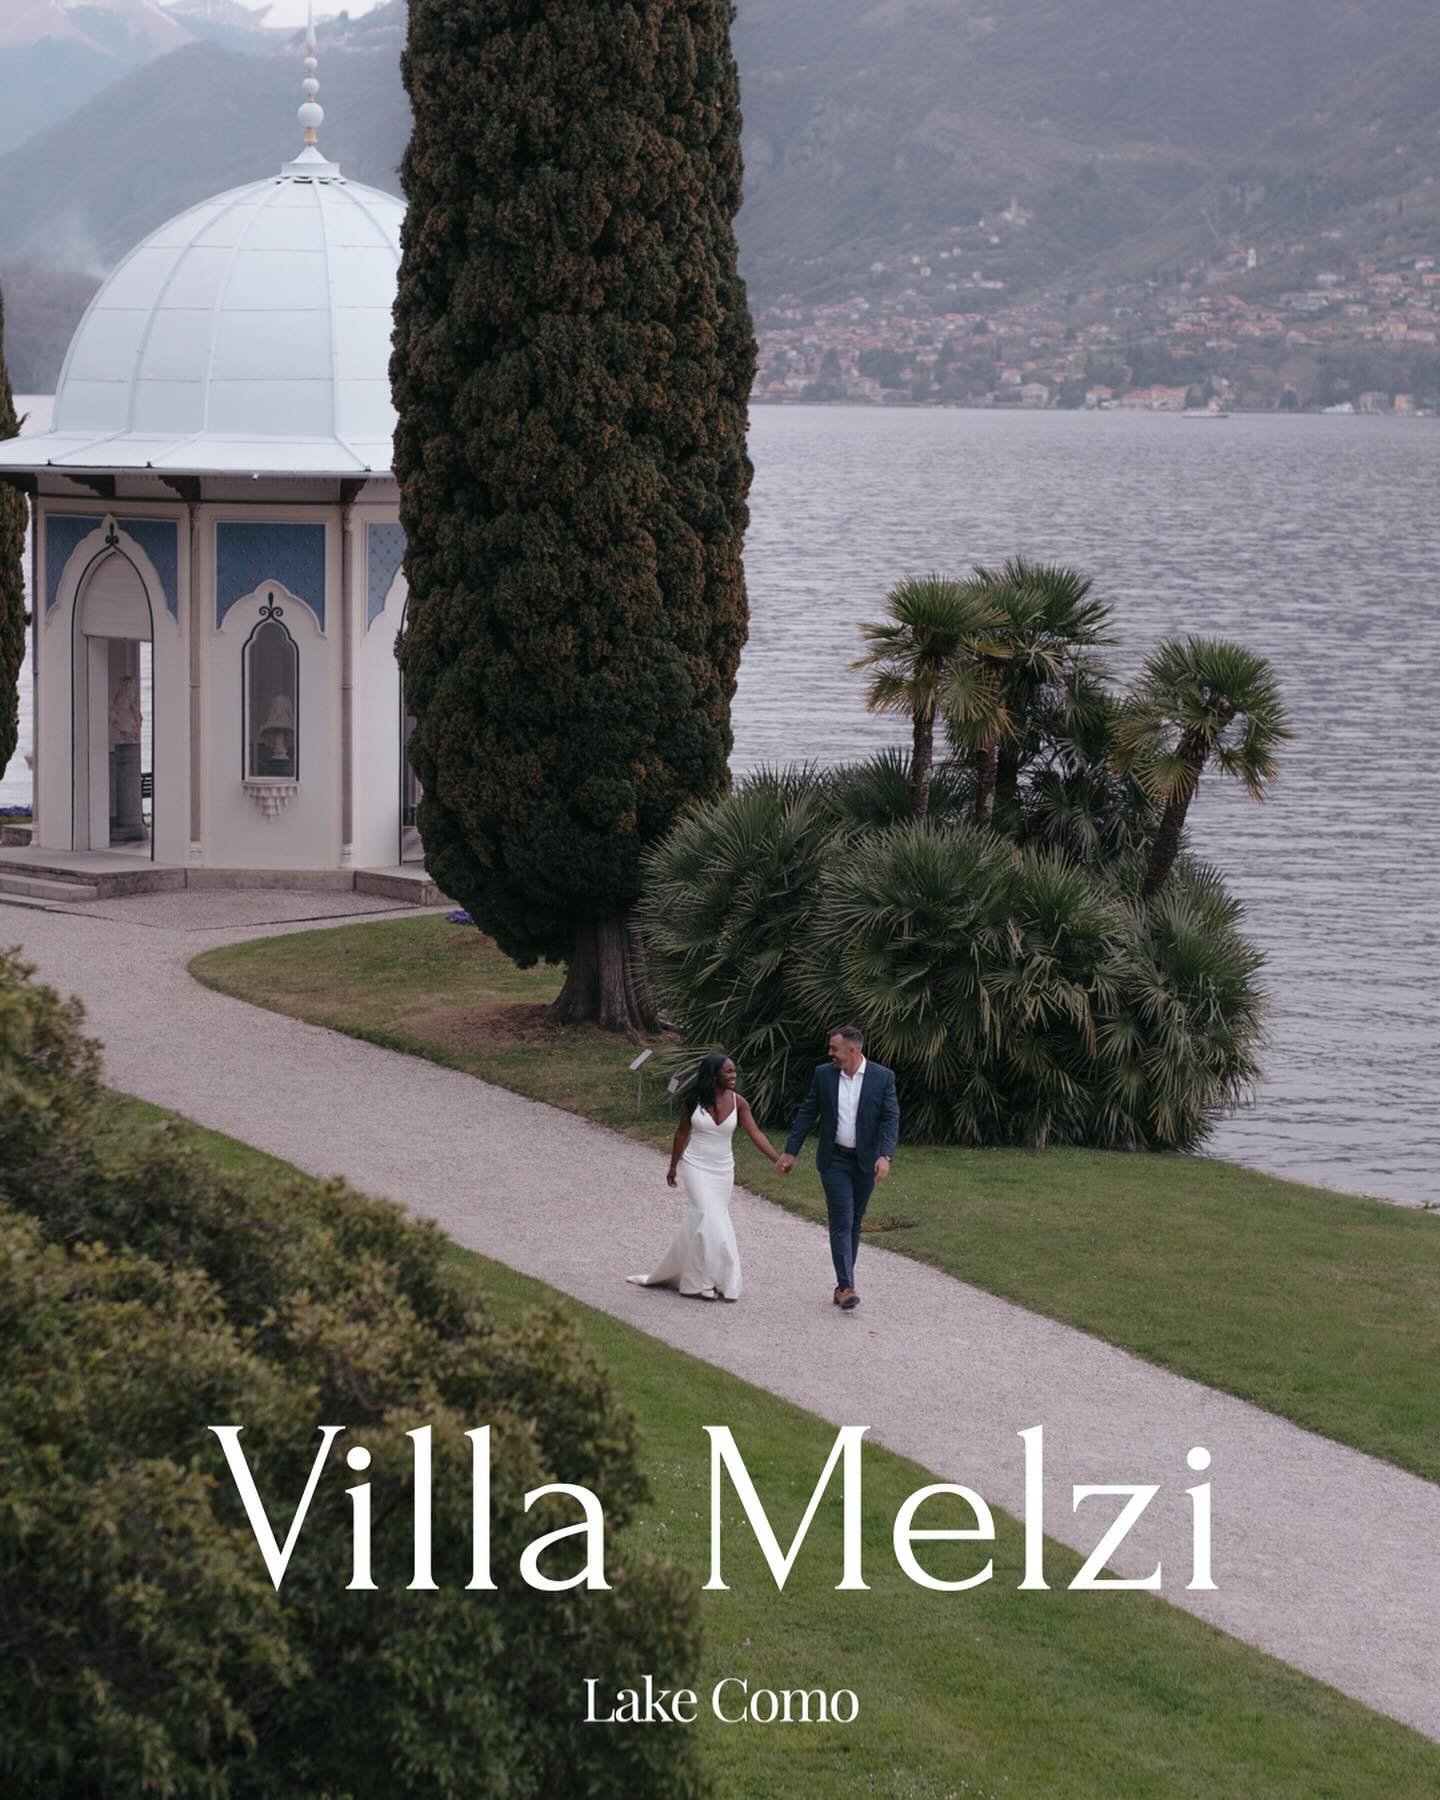 Lost in the timeless elegance of Villa Melzi &bull;
Nestled along the serene shores of Lake Como, this enchanting haven whispers tales of romance with every breeze that rustles through its gardens. 
For those seeking a place where love and nature int